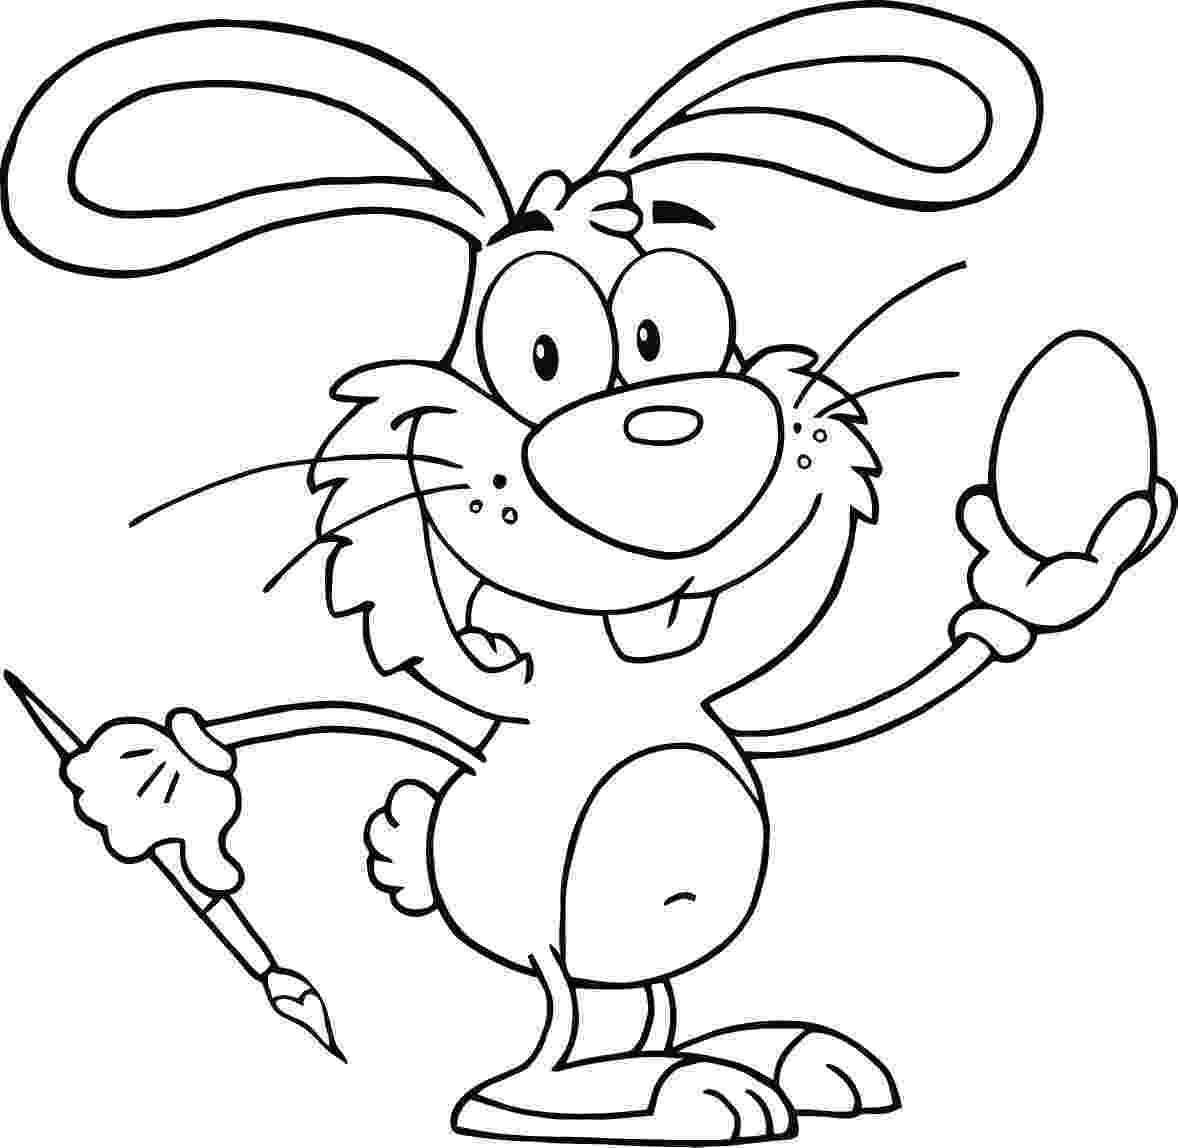 coloring pictures of rabbits free printable rabbit coloring pages for kids of pictures rabbits coloring 